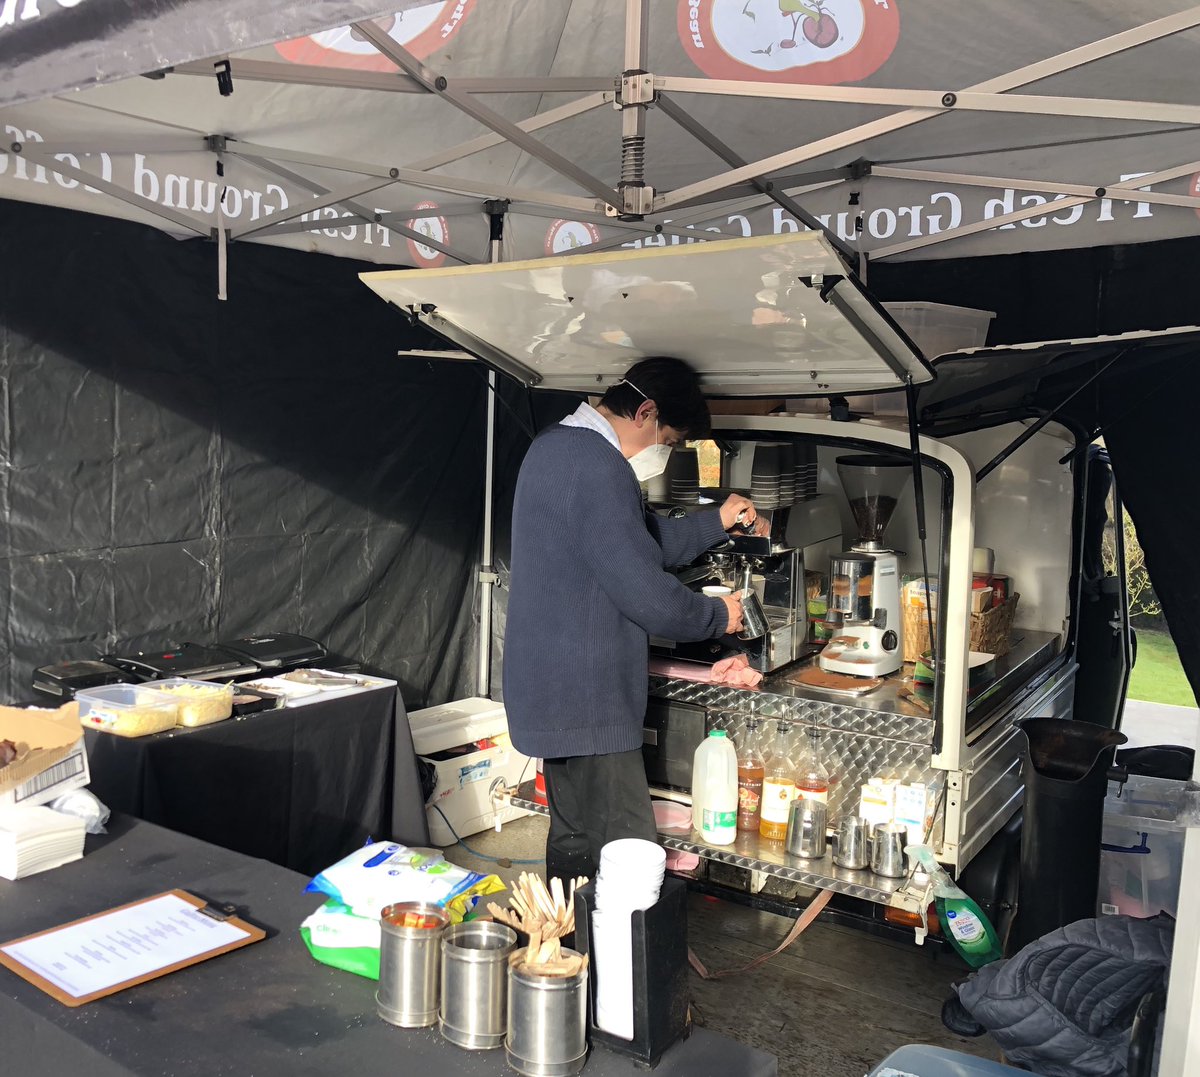 Back out with another deserving cast and crew .. our new home for the week 😁 supplementing the amazing #baristacoffee with mouth watering ooozzzyy toasties !!!! Yum 
.
.
.
#mobilecoffee
#craftservice
#crewcatering
#fuellingthemovies
#coffee
#baristacoffeebar